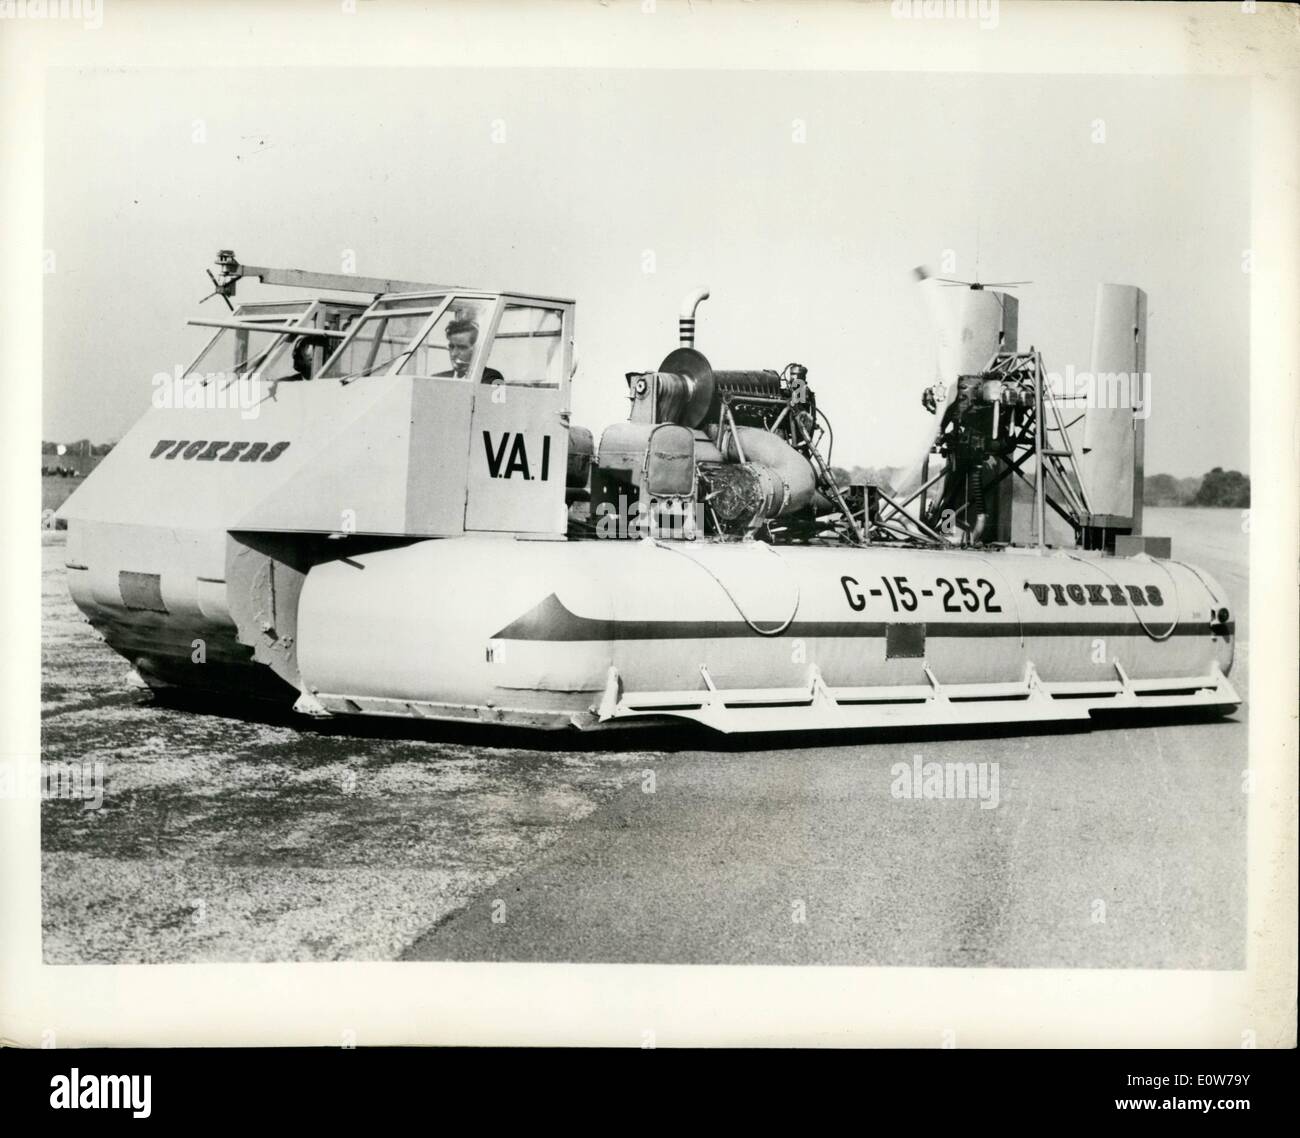 Oct. 10, 1961 - Air ''Wall'' Rider: At South Marston, England, chief test pilot L.R. Colquohoun demonstrates a new British research hovercraft, the Vickers VA-1, claimed by its makers fundamentally different in shape from previous hovercrafts. Capable of remaining stationary, gliding slowly and reaching a speed up to 40 m.p.h., the VA-1 uses an ''air wall'' pumped out under its edges to contain the main, central lifting thrust, thus saving power, increasing the hover-height and reducing spray over water Stock Photo